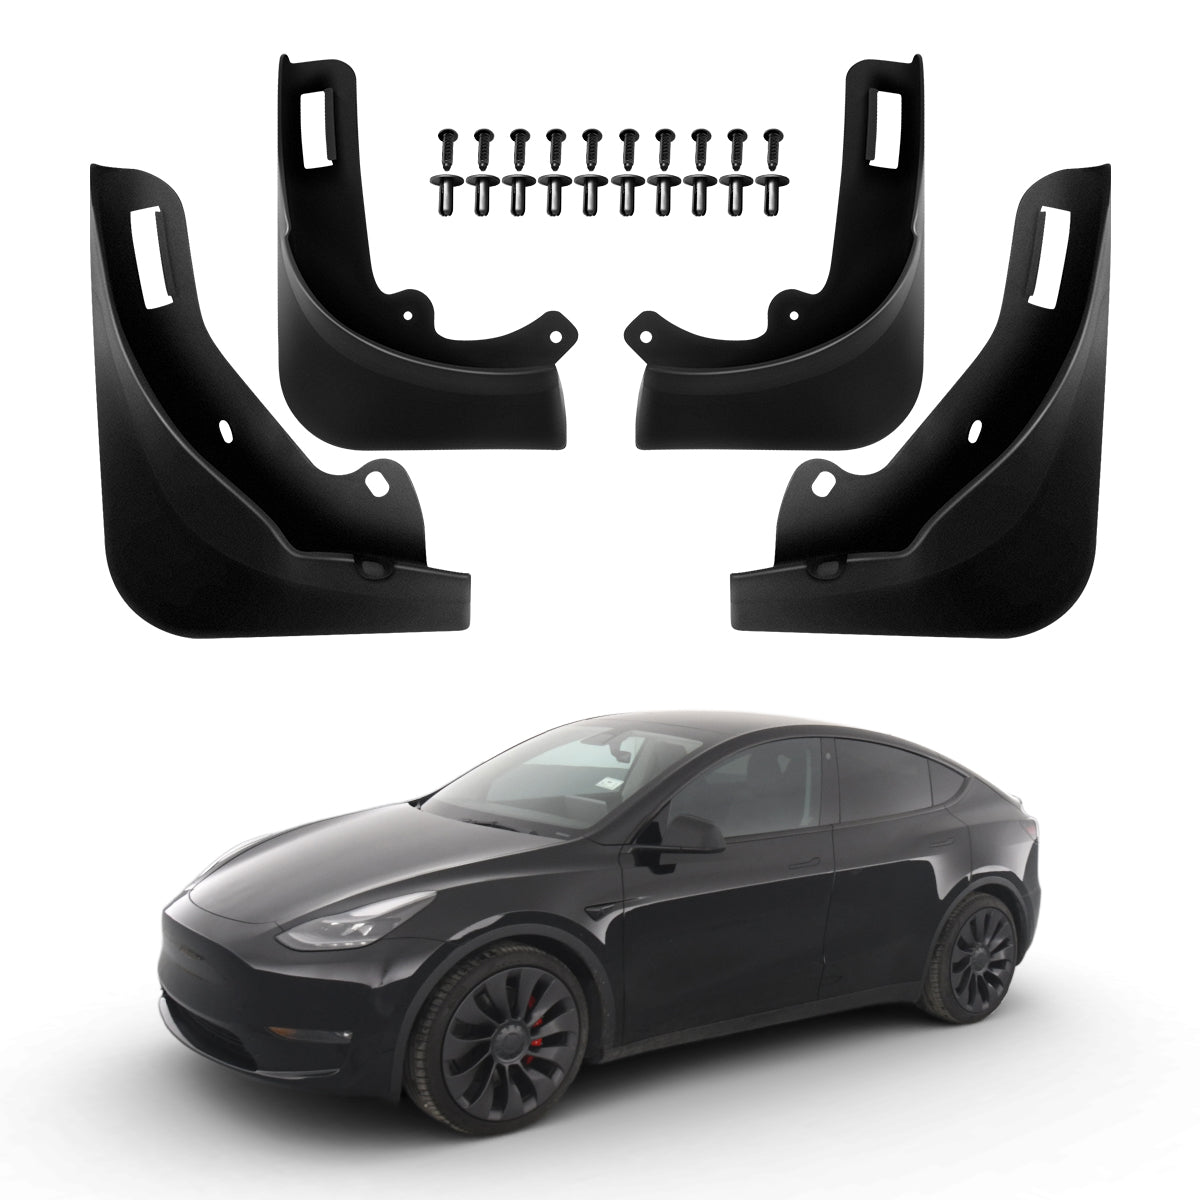 Exquisite High Quality Matte Black Splash Guards Mud Flaps Mudguards For Tesla  Model Y No Need To Drill Holes Model 3 Y Fender Mud Guard